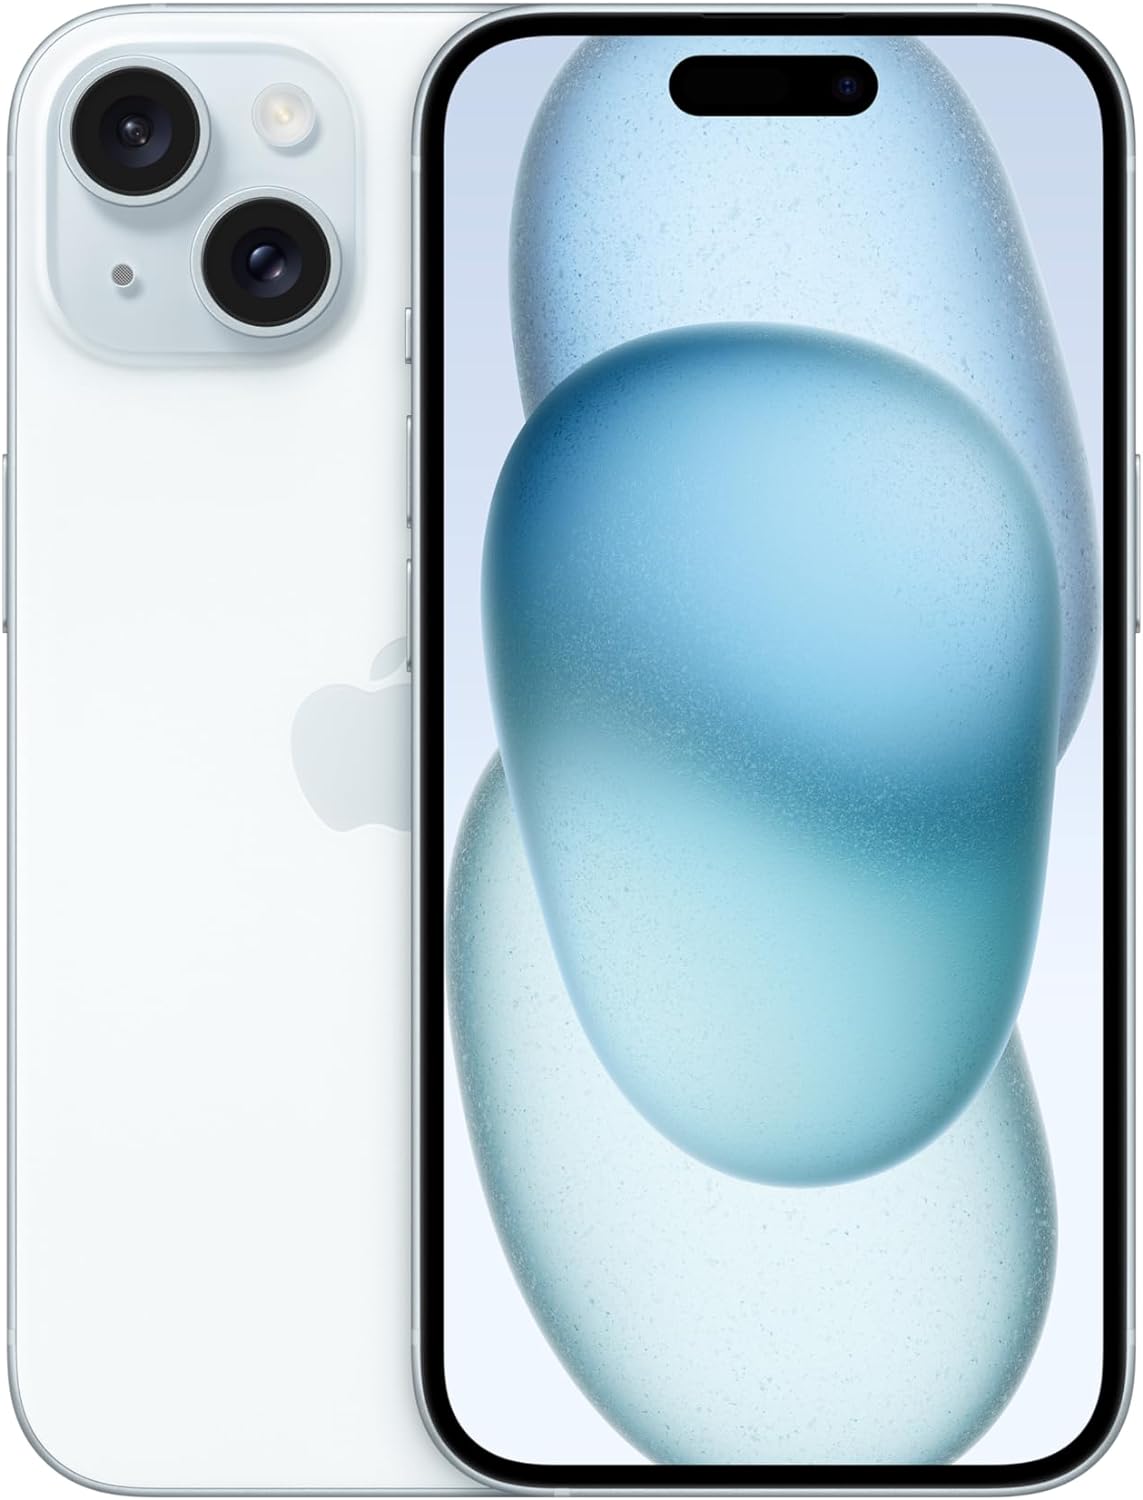 Apple iPhone 15 (128 GB) - Blue: Dynamic Island alerts and Live Activities keep you connected on the go. 0195949036446